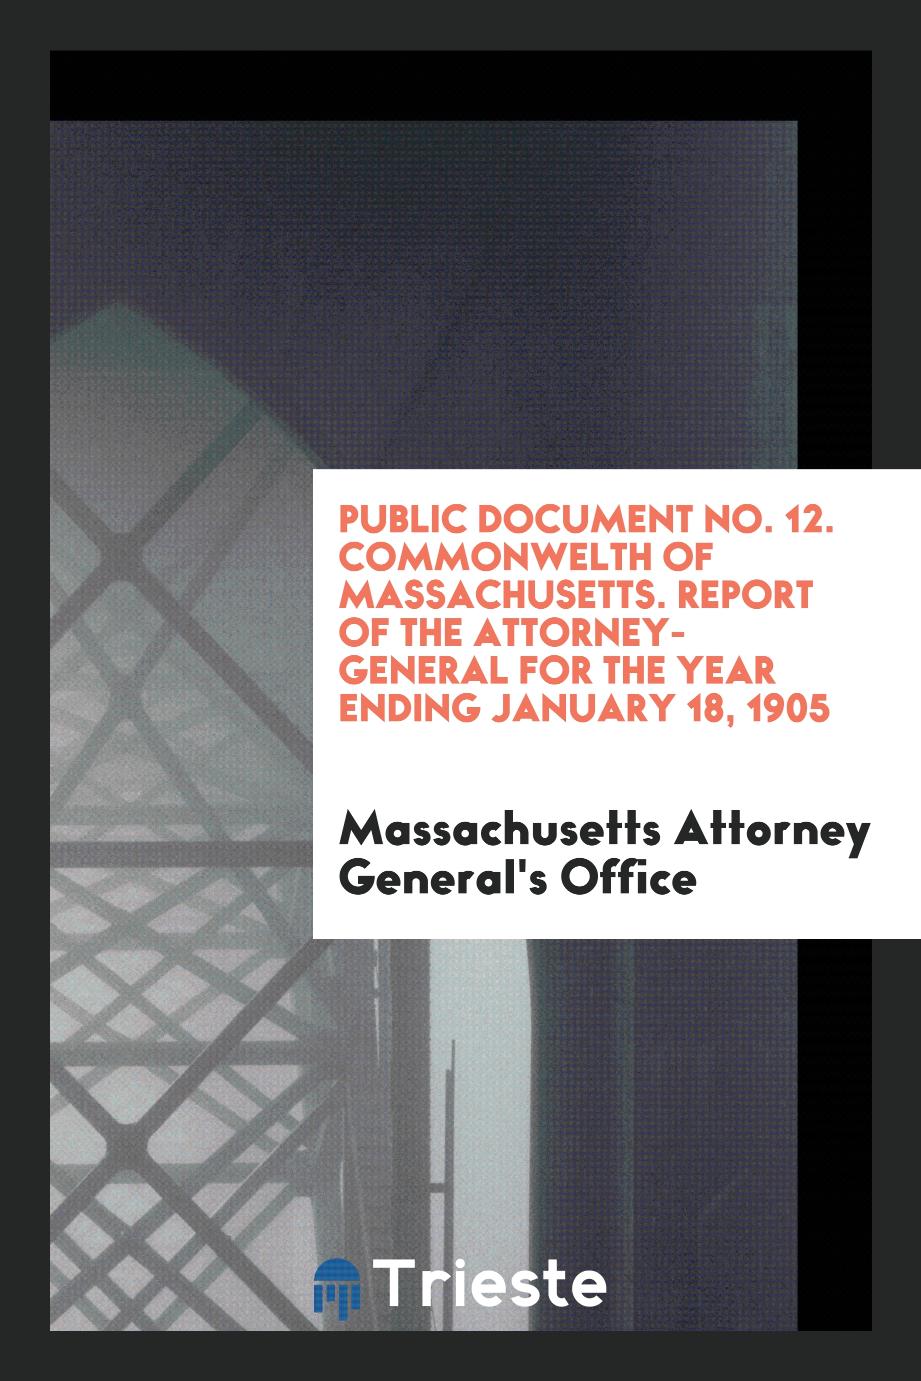 Public Document No. 12. Commonwelth of Massachusetts. Report of the Attorney-General for the Year Ending January 18, 1905